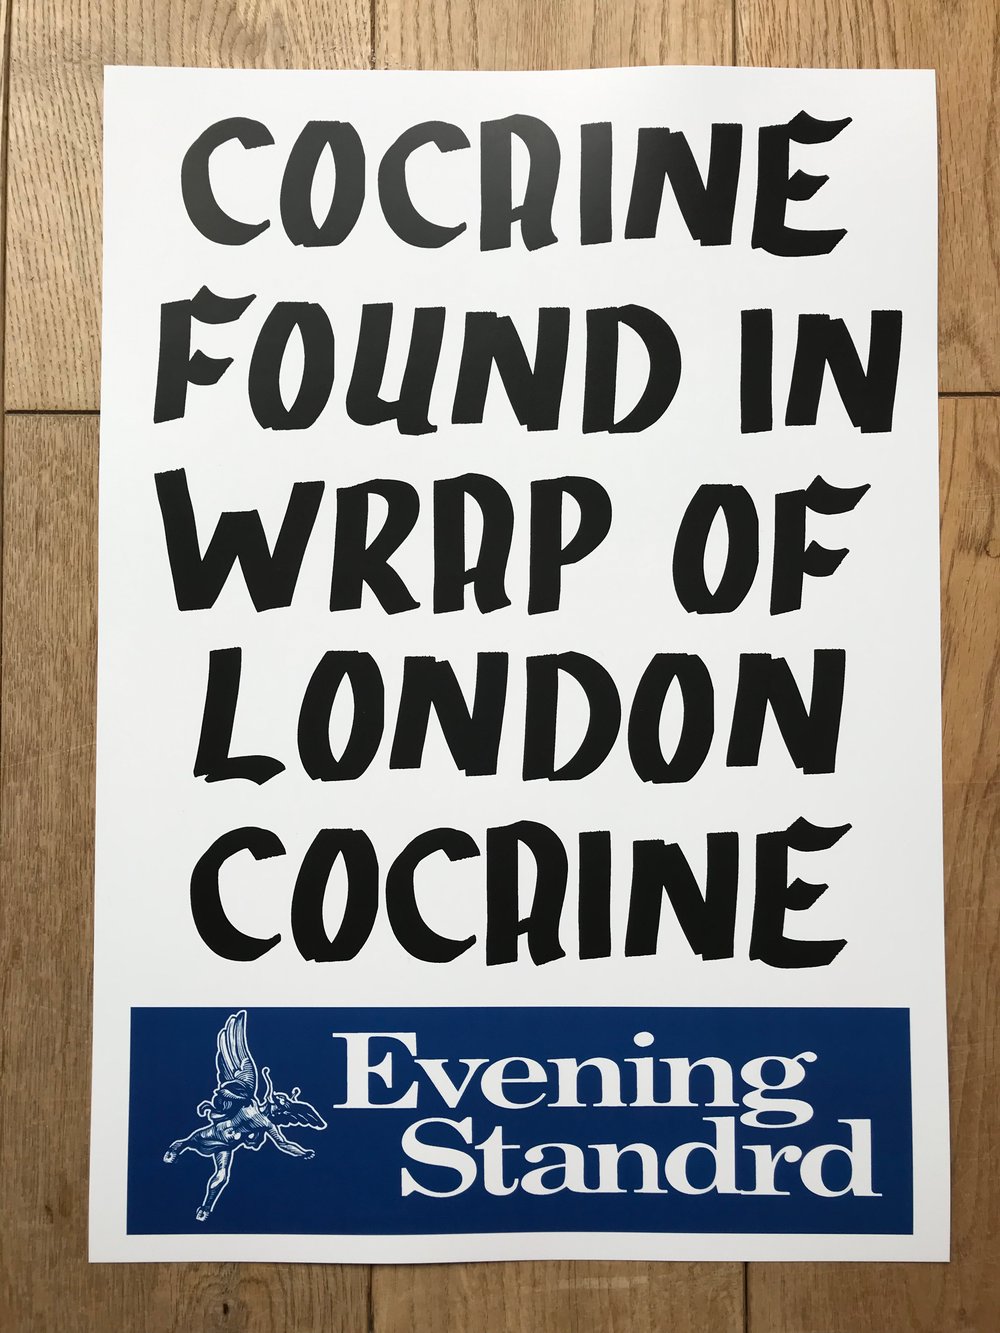 Image of COCAINE FOUND IN WRAP OF LONDON COCAINE